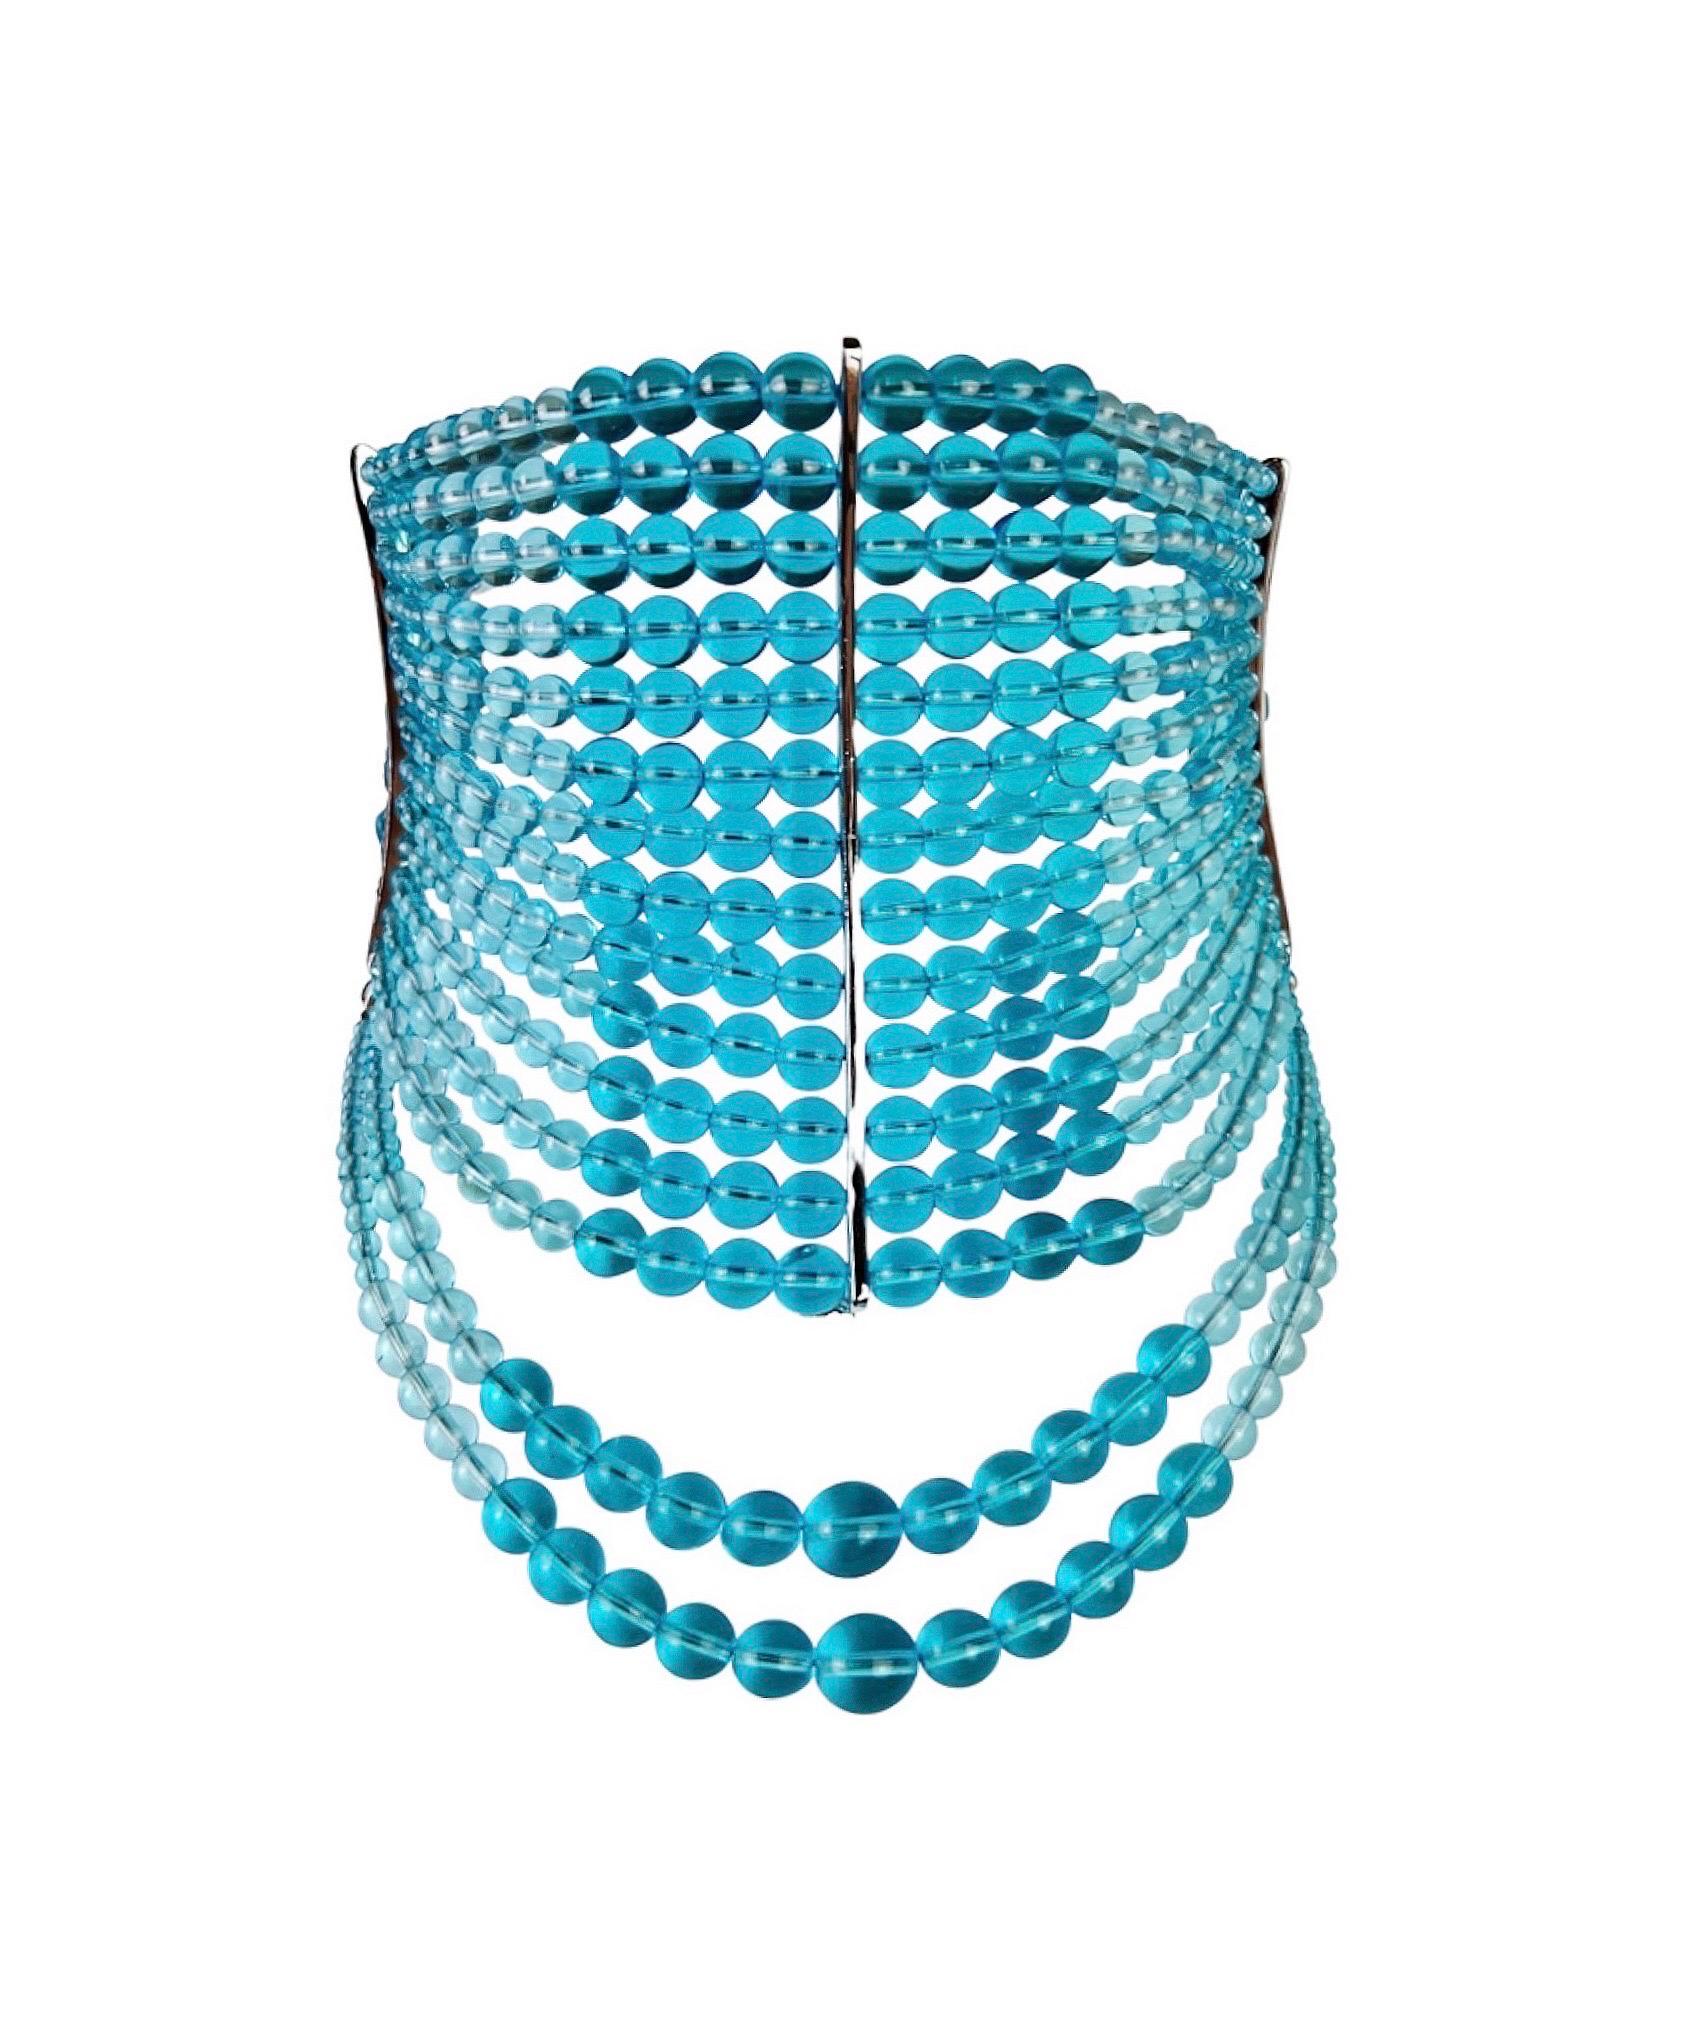 A truly iconic Dior Masai necklace in a stunning clear turquoise blue glass and silver-toned hardware. A similar style was seen recently on Rihanna. 

Length - 32-38 cm (12,5-15 in)
Height (central metal plank)  - 10 cm (4 in)
Excellent vintage